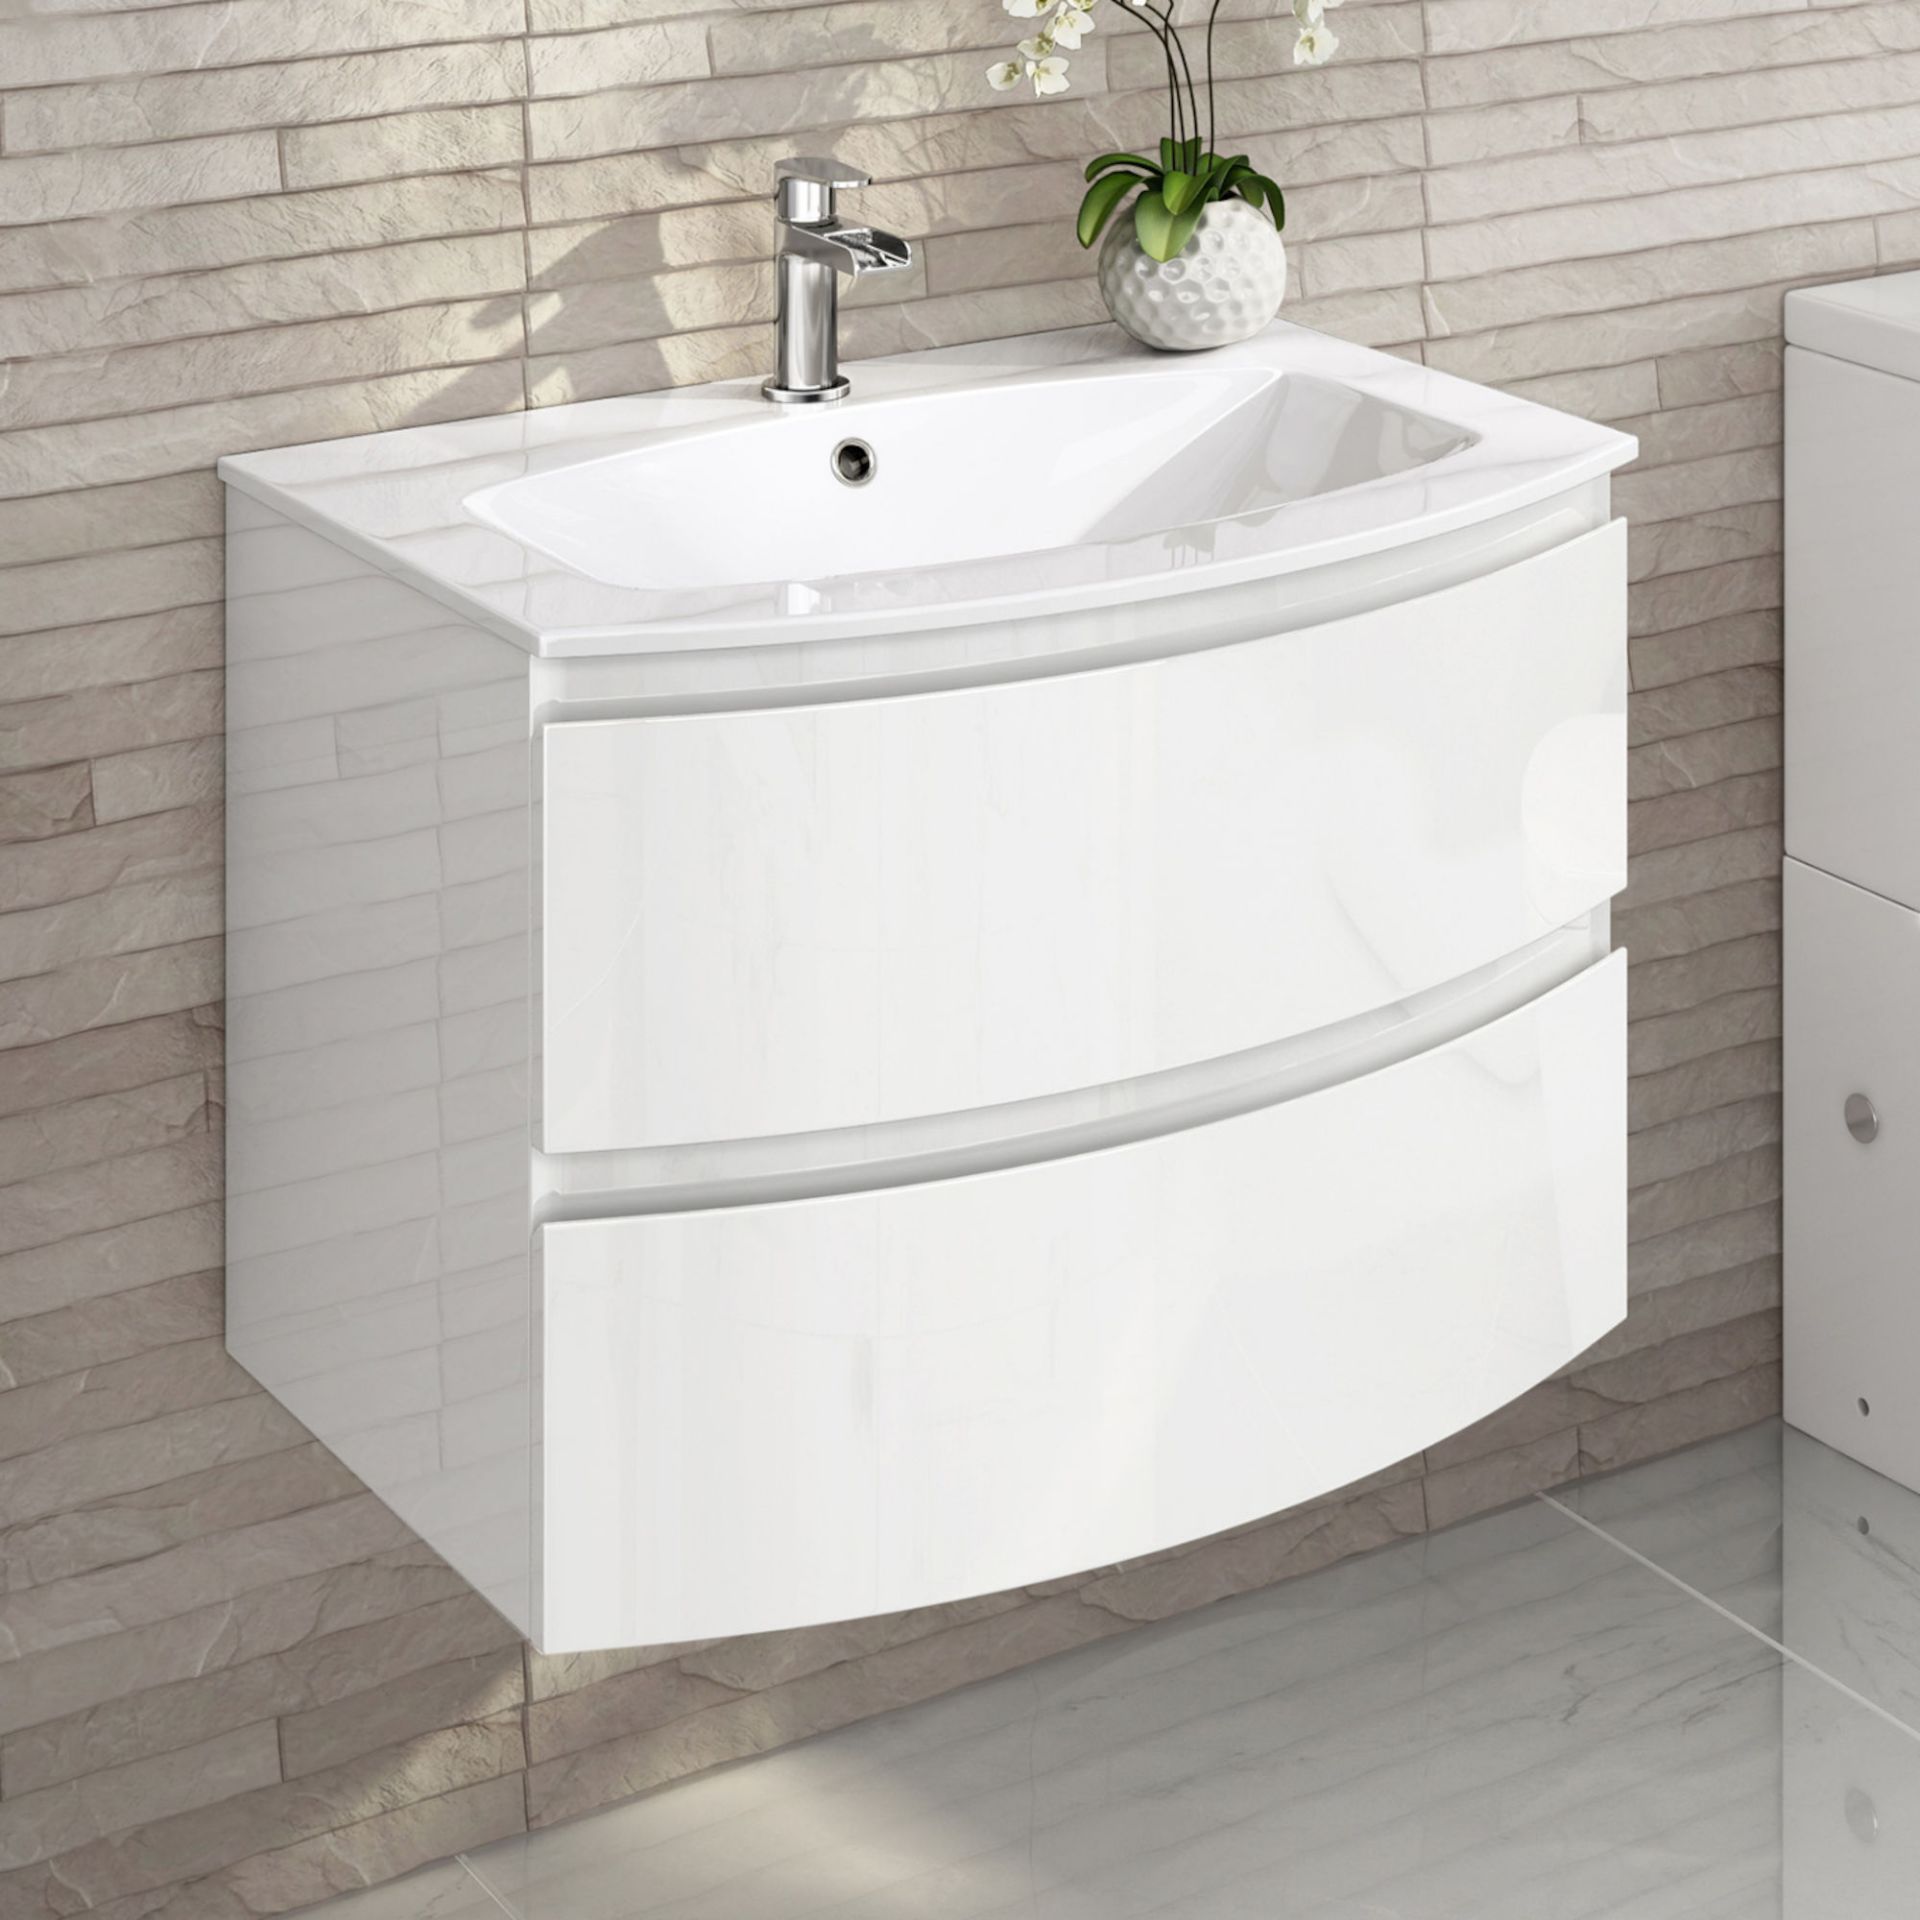 NEW 700mm Amelie High Gloss White Curved Vanity Unit - Wall Hung. Comes complete with basin. ...